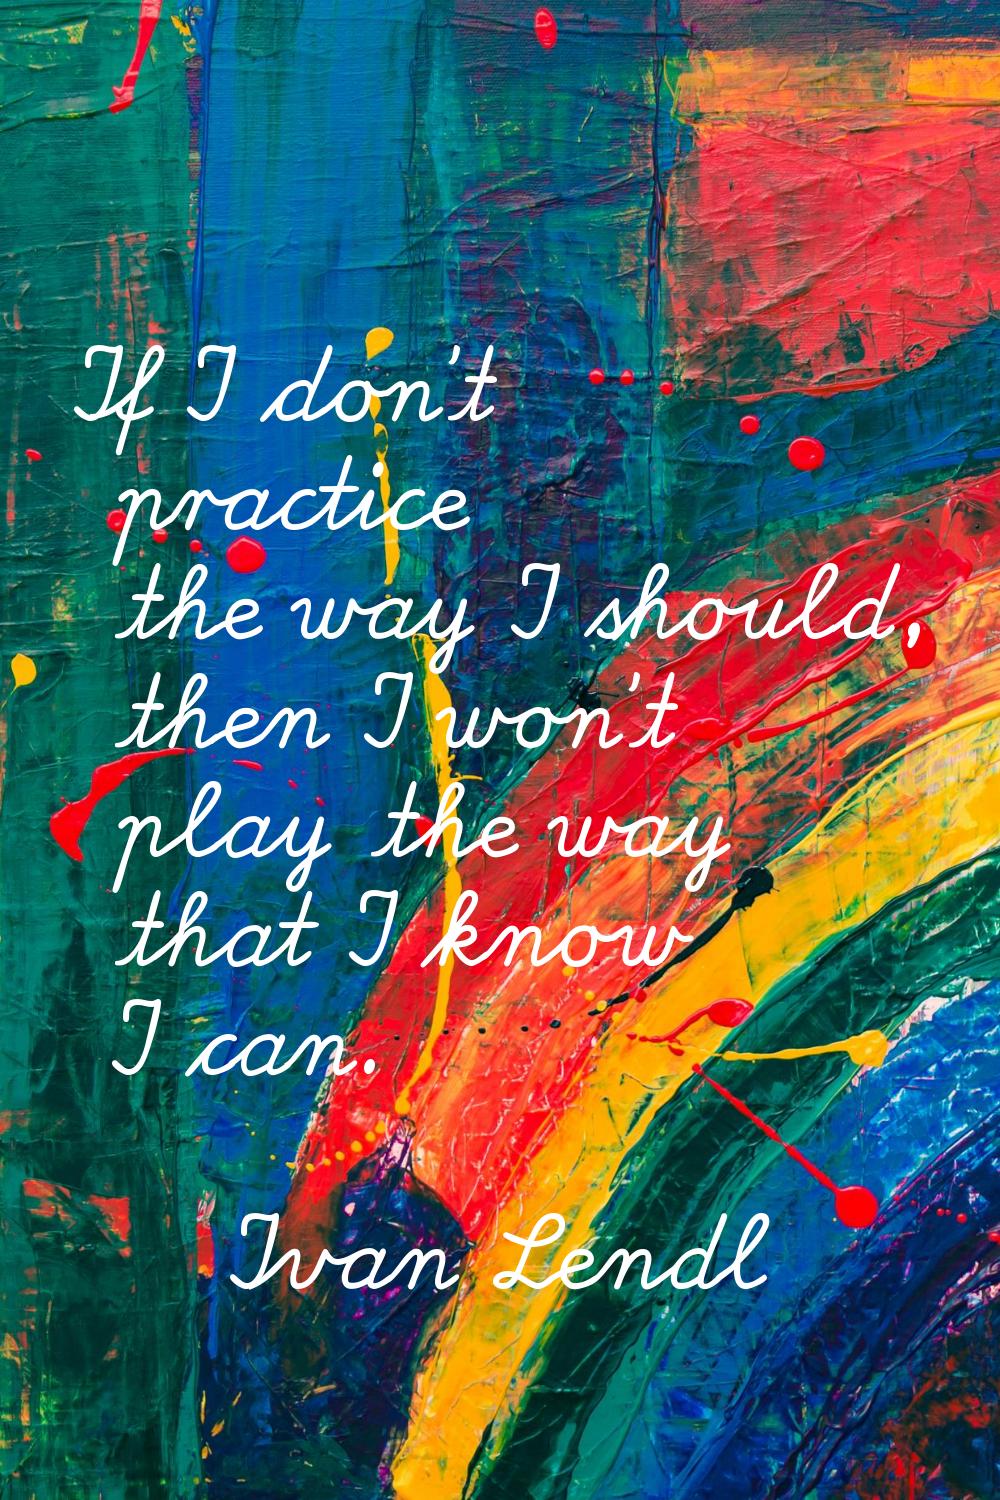 If I don't practice the way I should, then I won't play the way that I know I can.